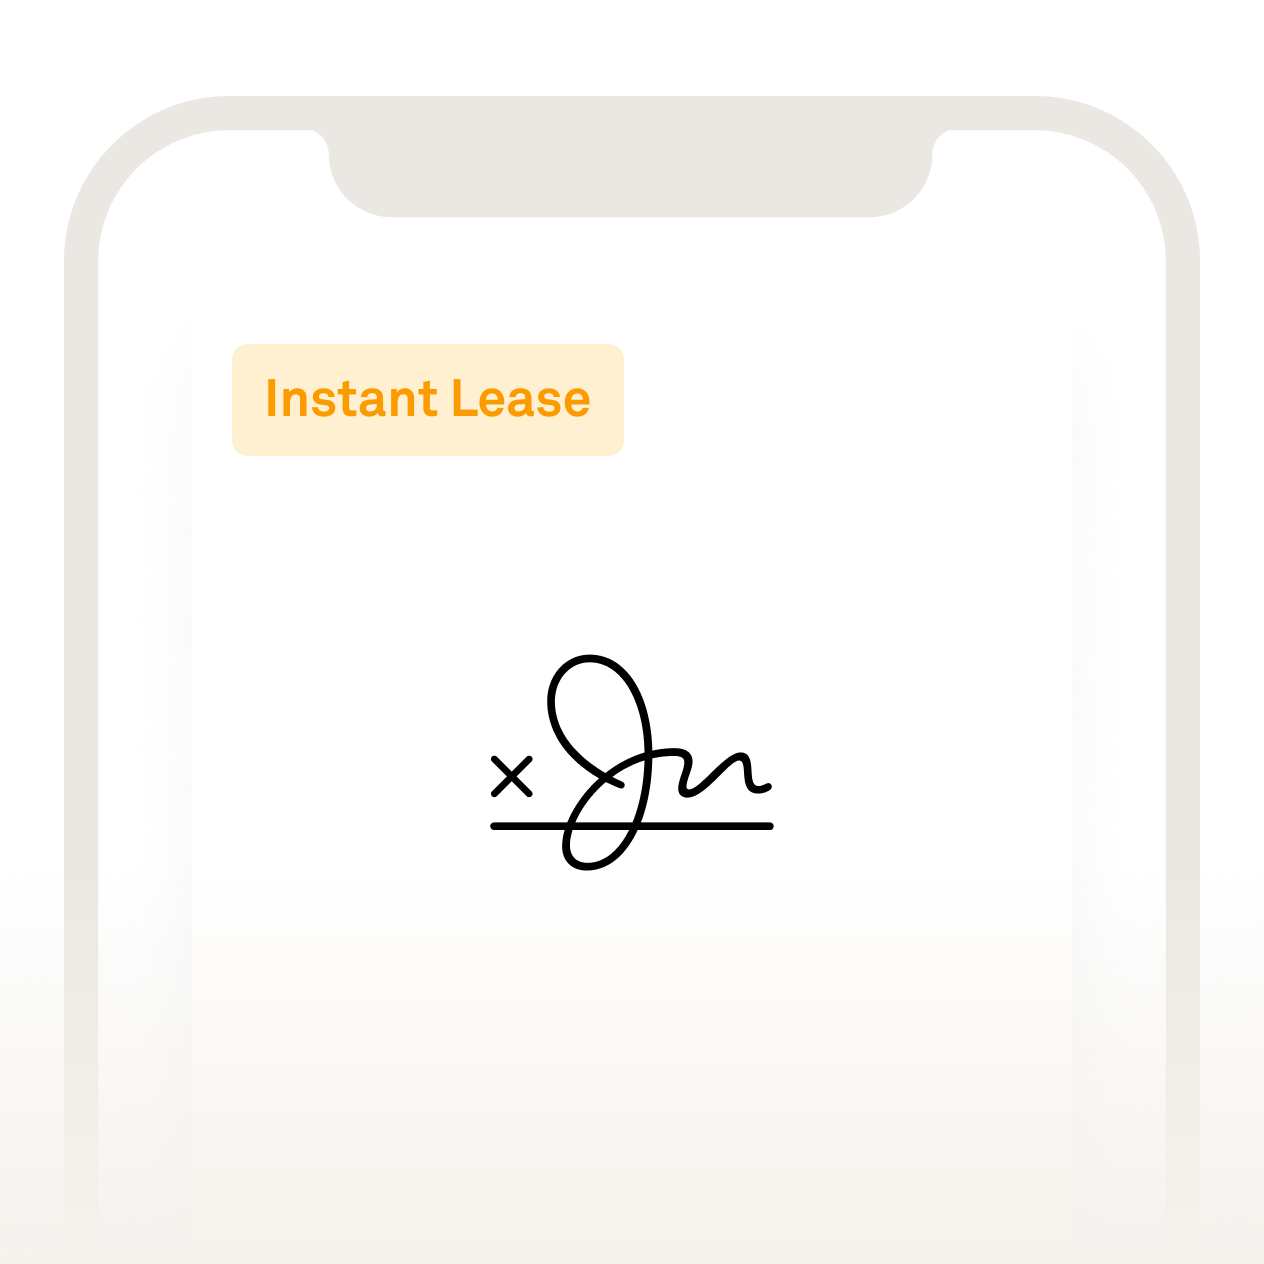 <span class="sunrise-text-gradient">Sign a lease</span> and move in faster than you thought possible